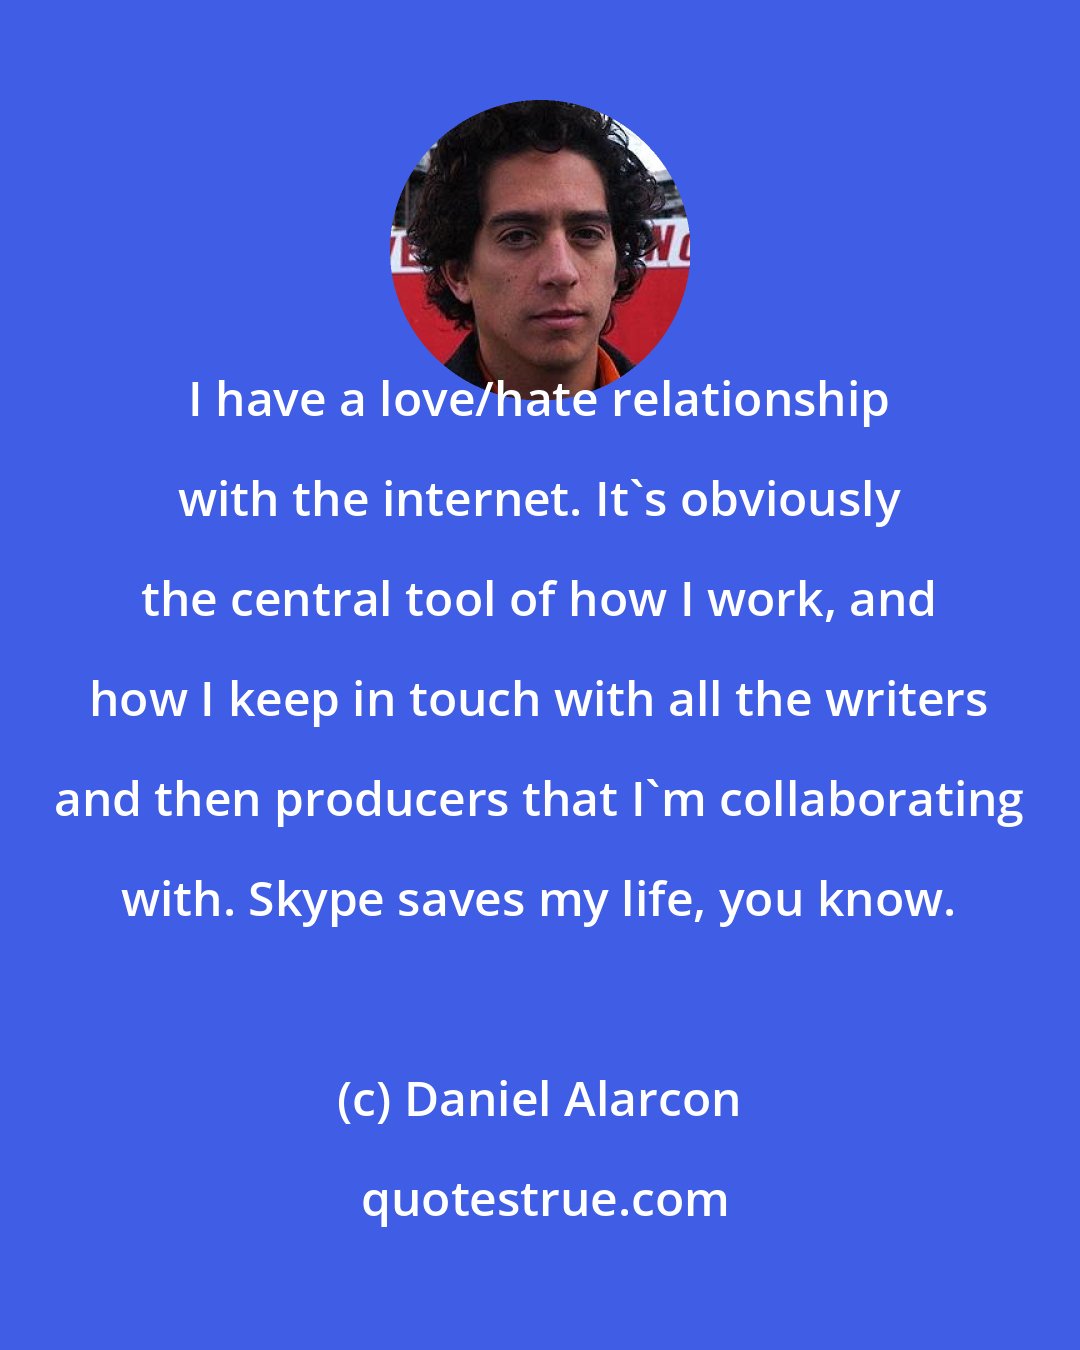 Daniel Alarcon: I have a love/hate relationship with the internet. It's obviously the central tool of how I work, and how I keep in touch with all the writers and then producers that I'm collaborating with. Skype saves my life, you know.